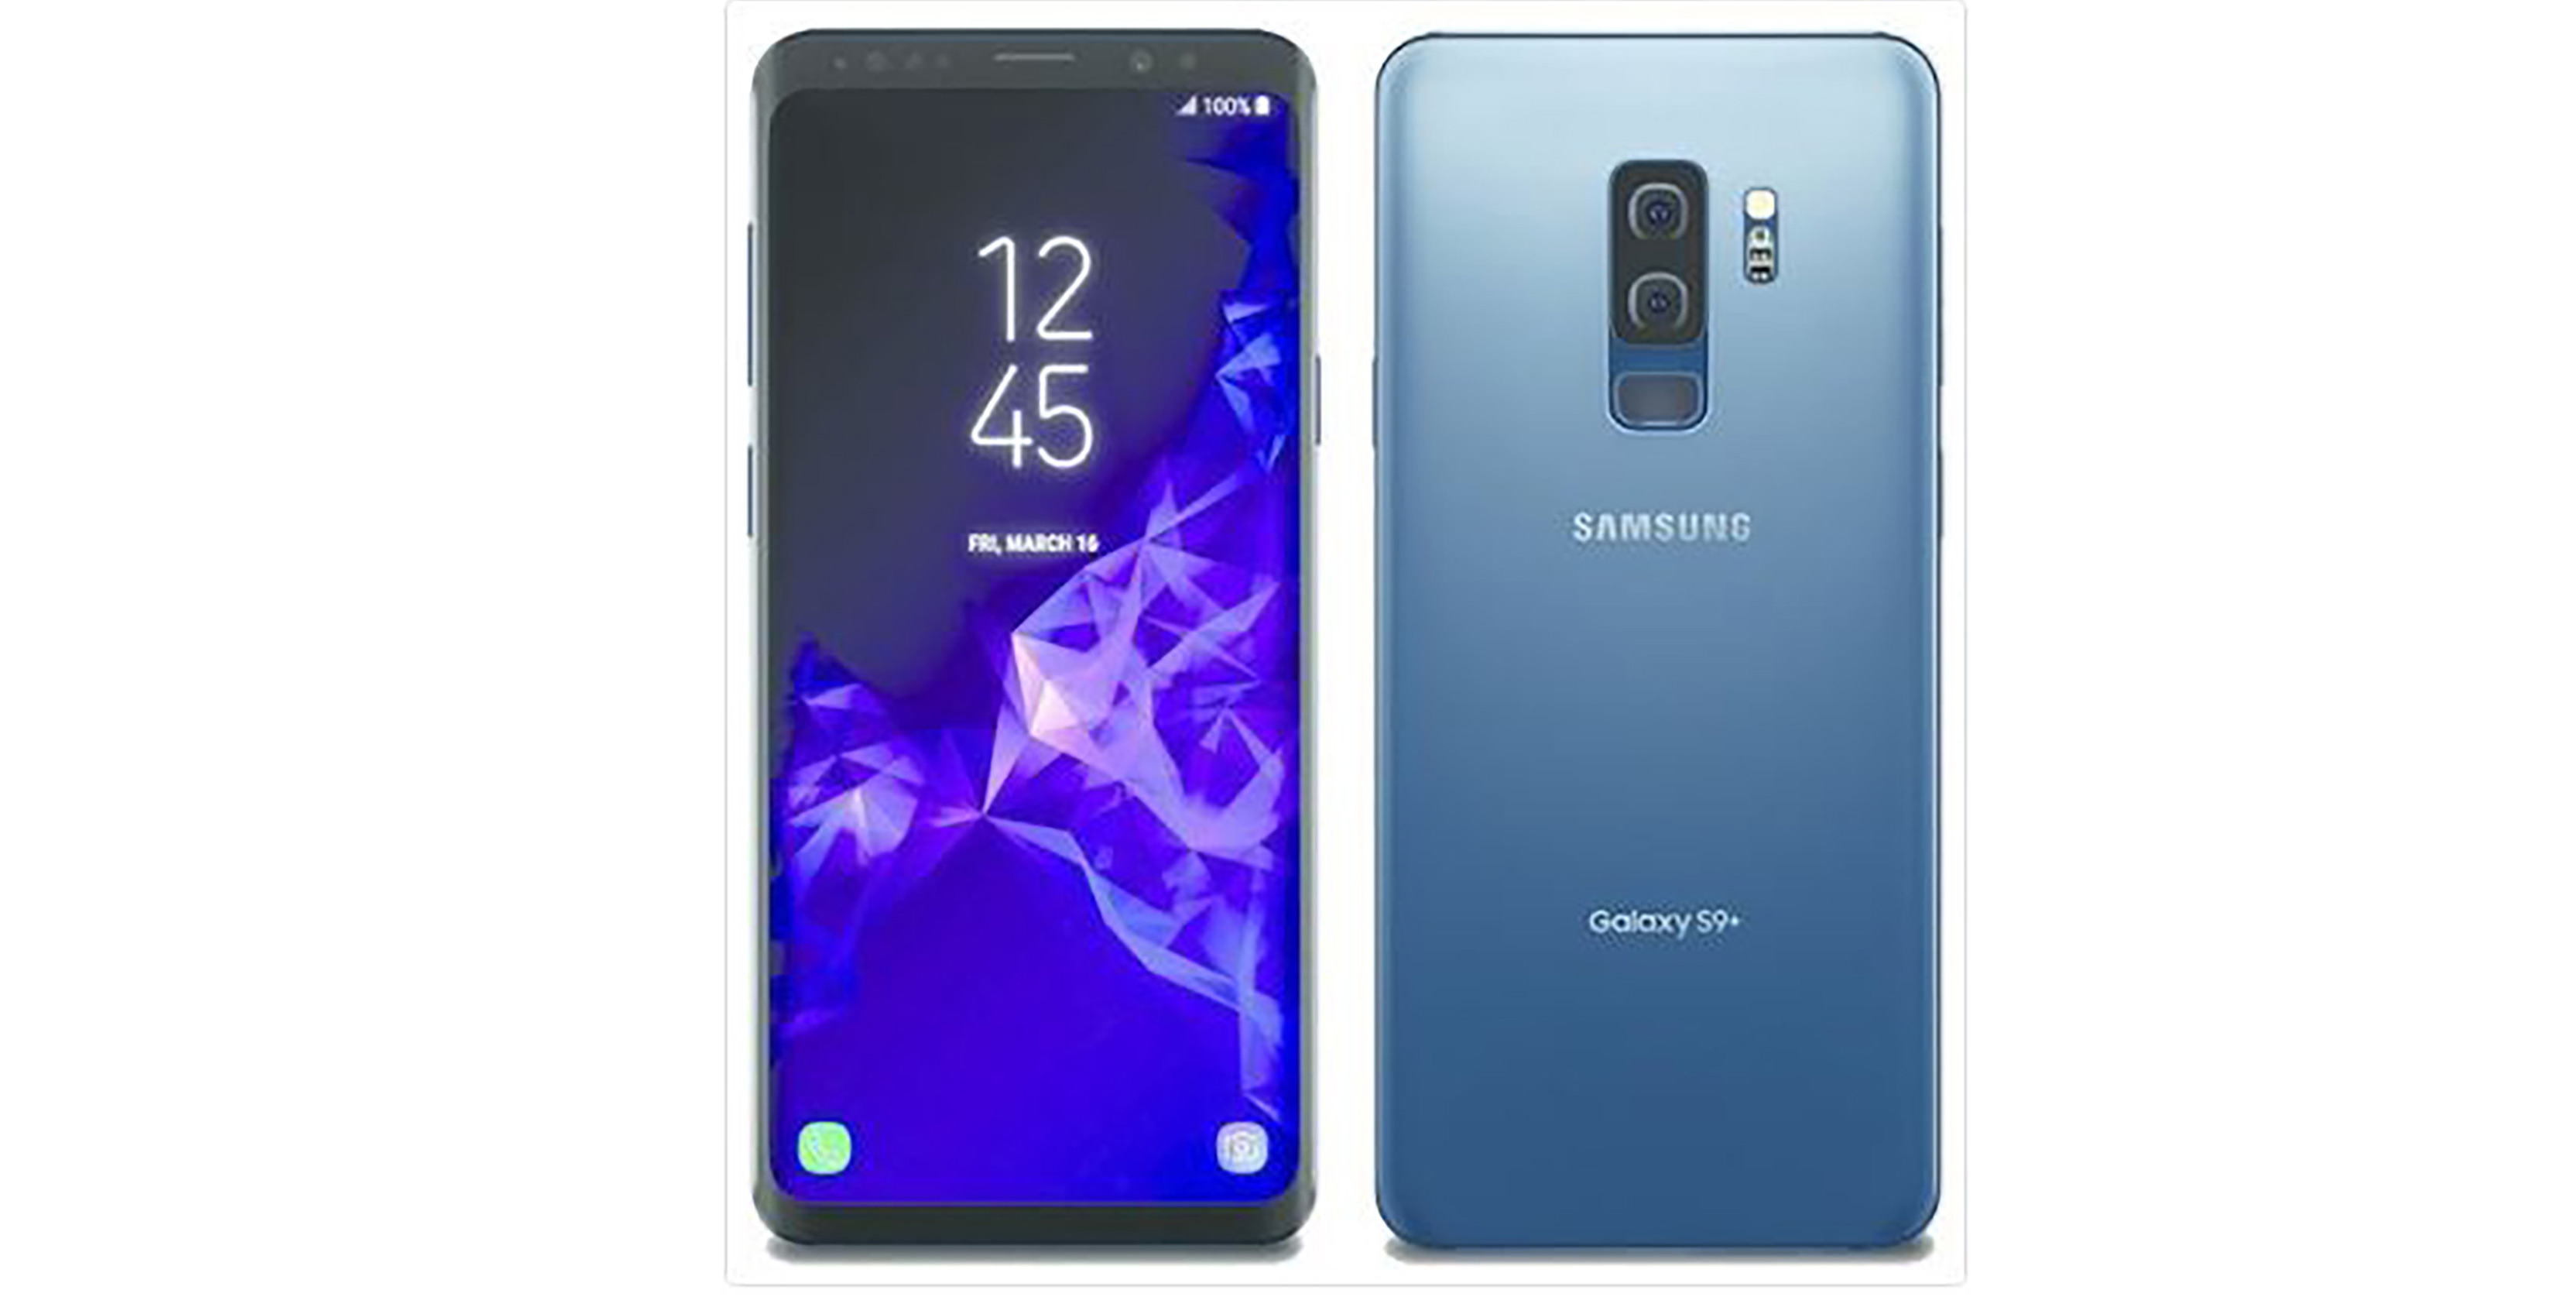 Galaxy S9 in coral blue